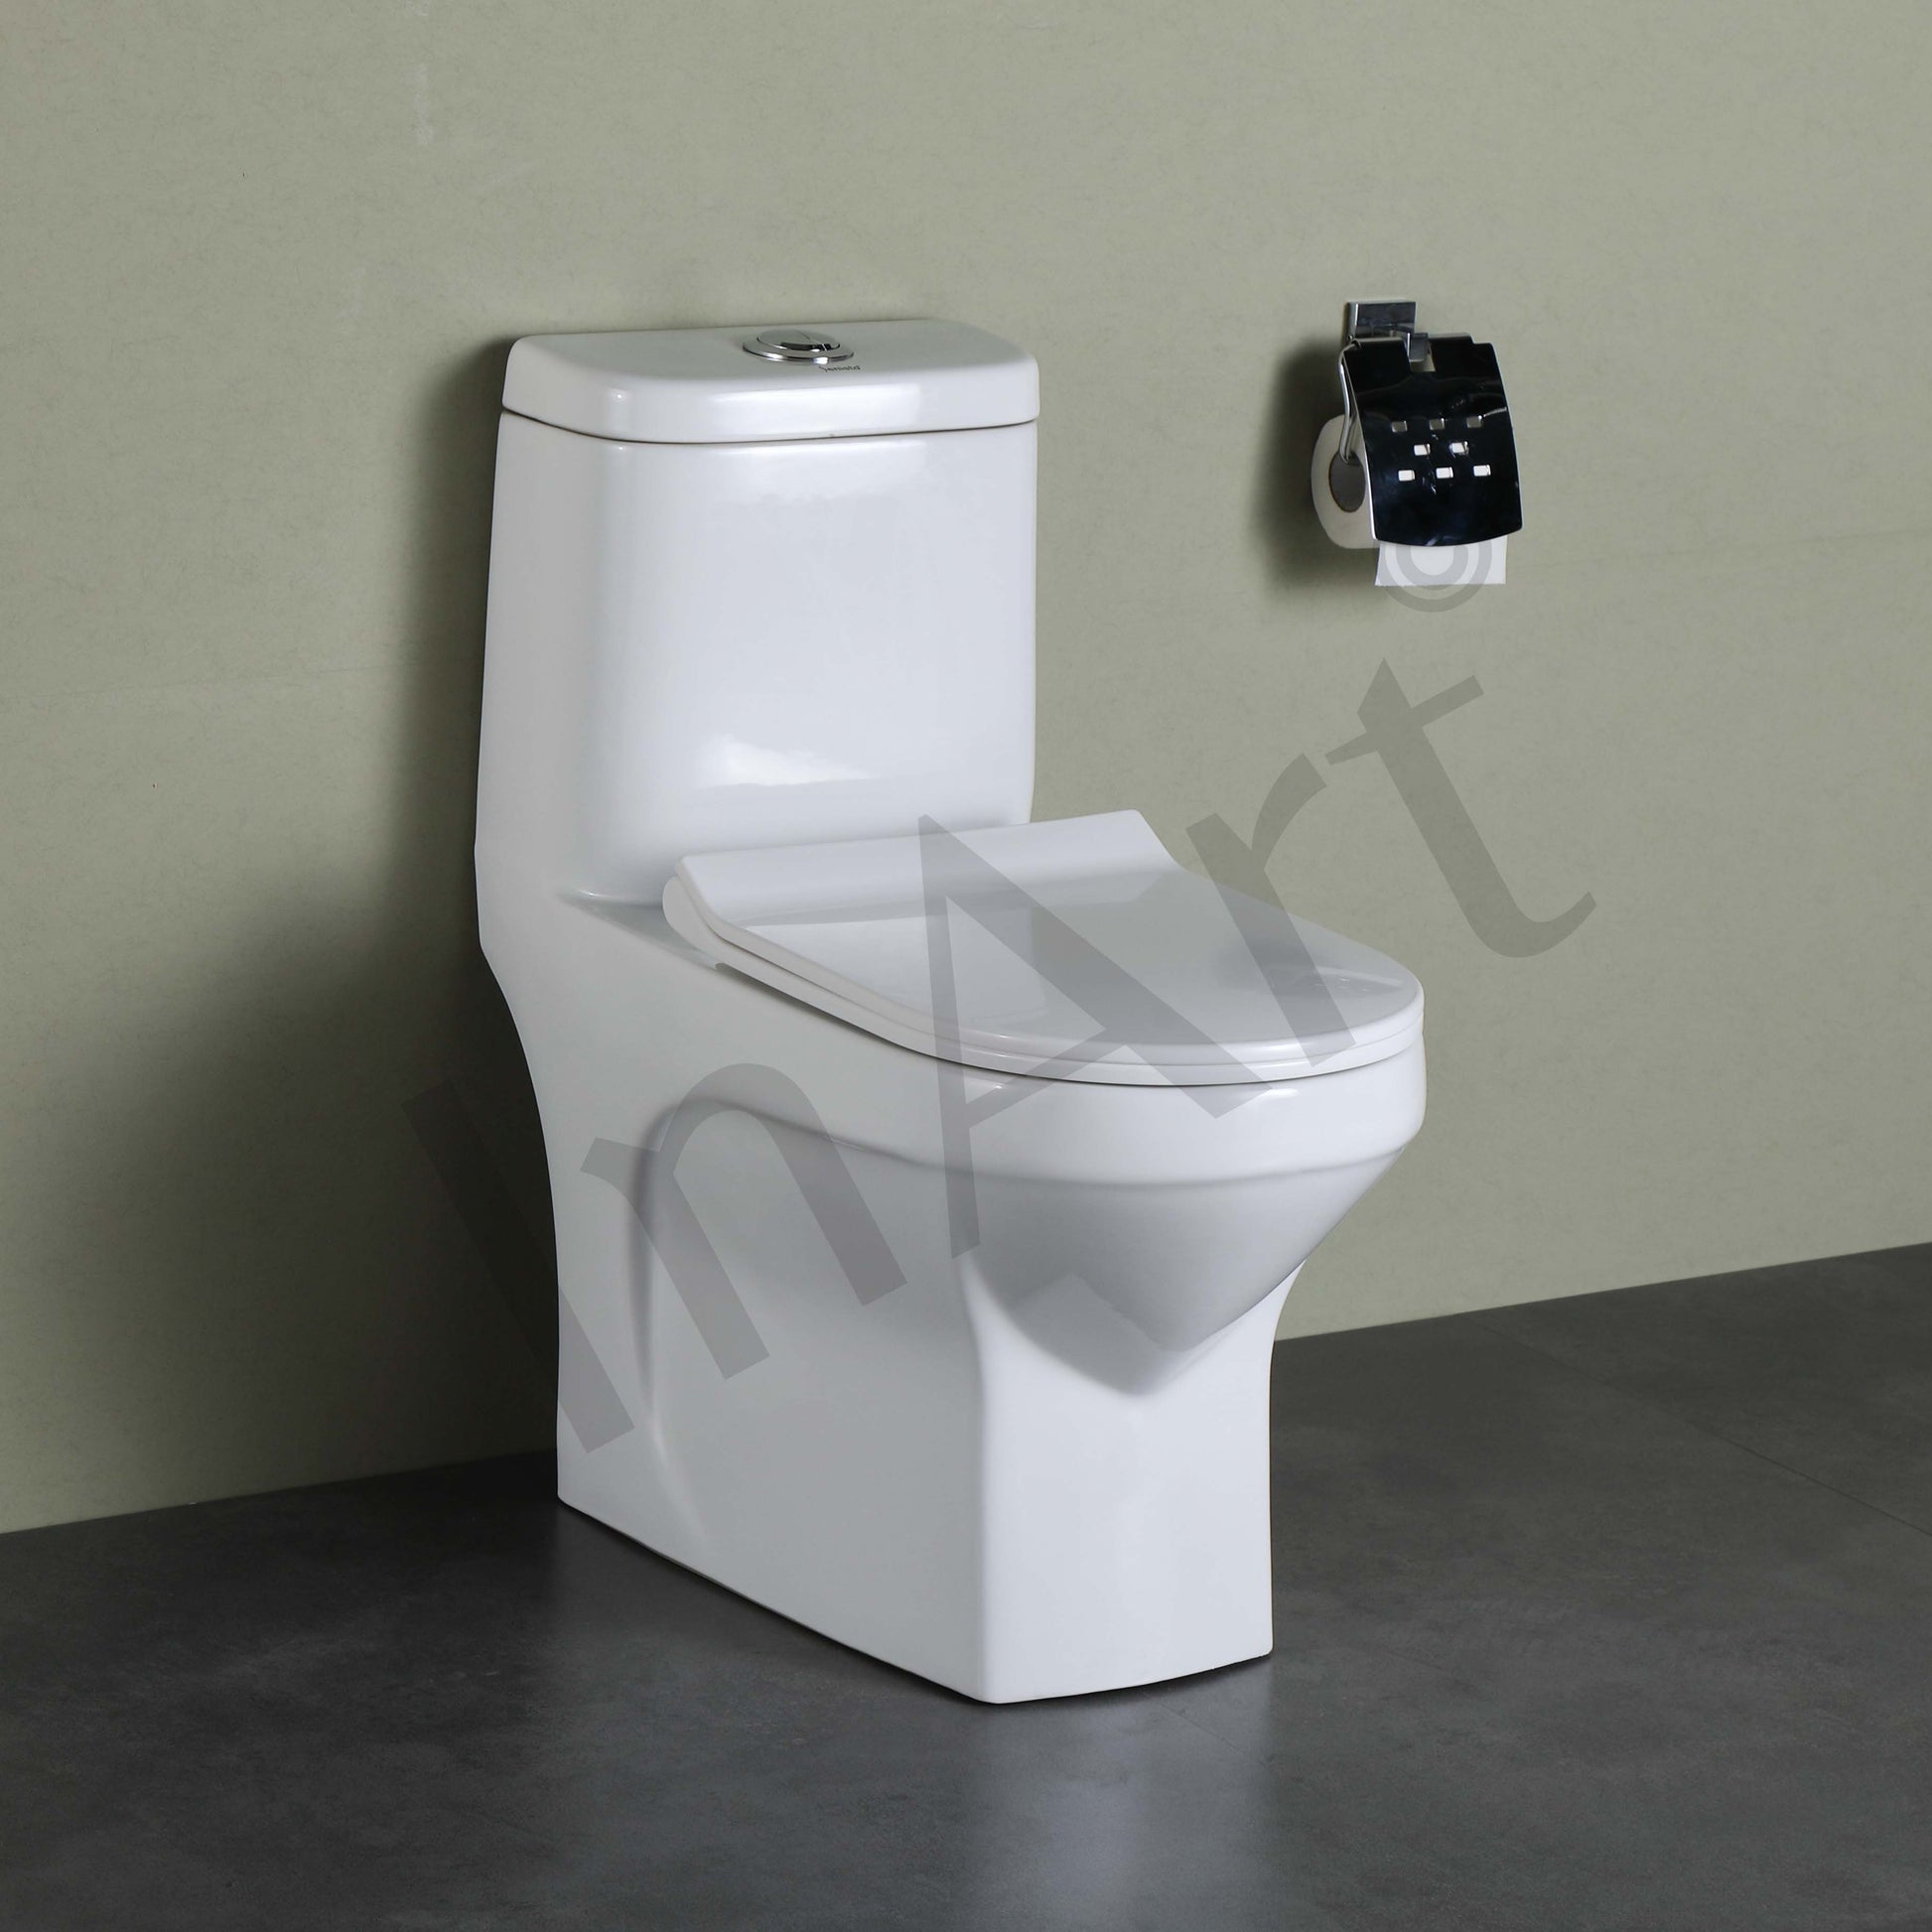 InArt Western Floor Mounted One Piece Water Closet European Ceramic Western Toilet S-Trap Commode Oval - InArt-Studio